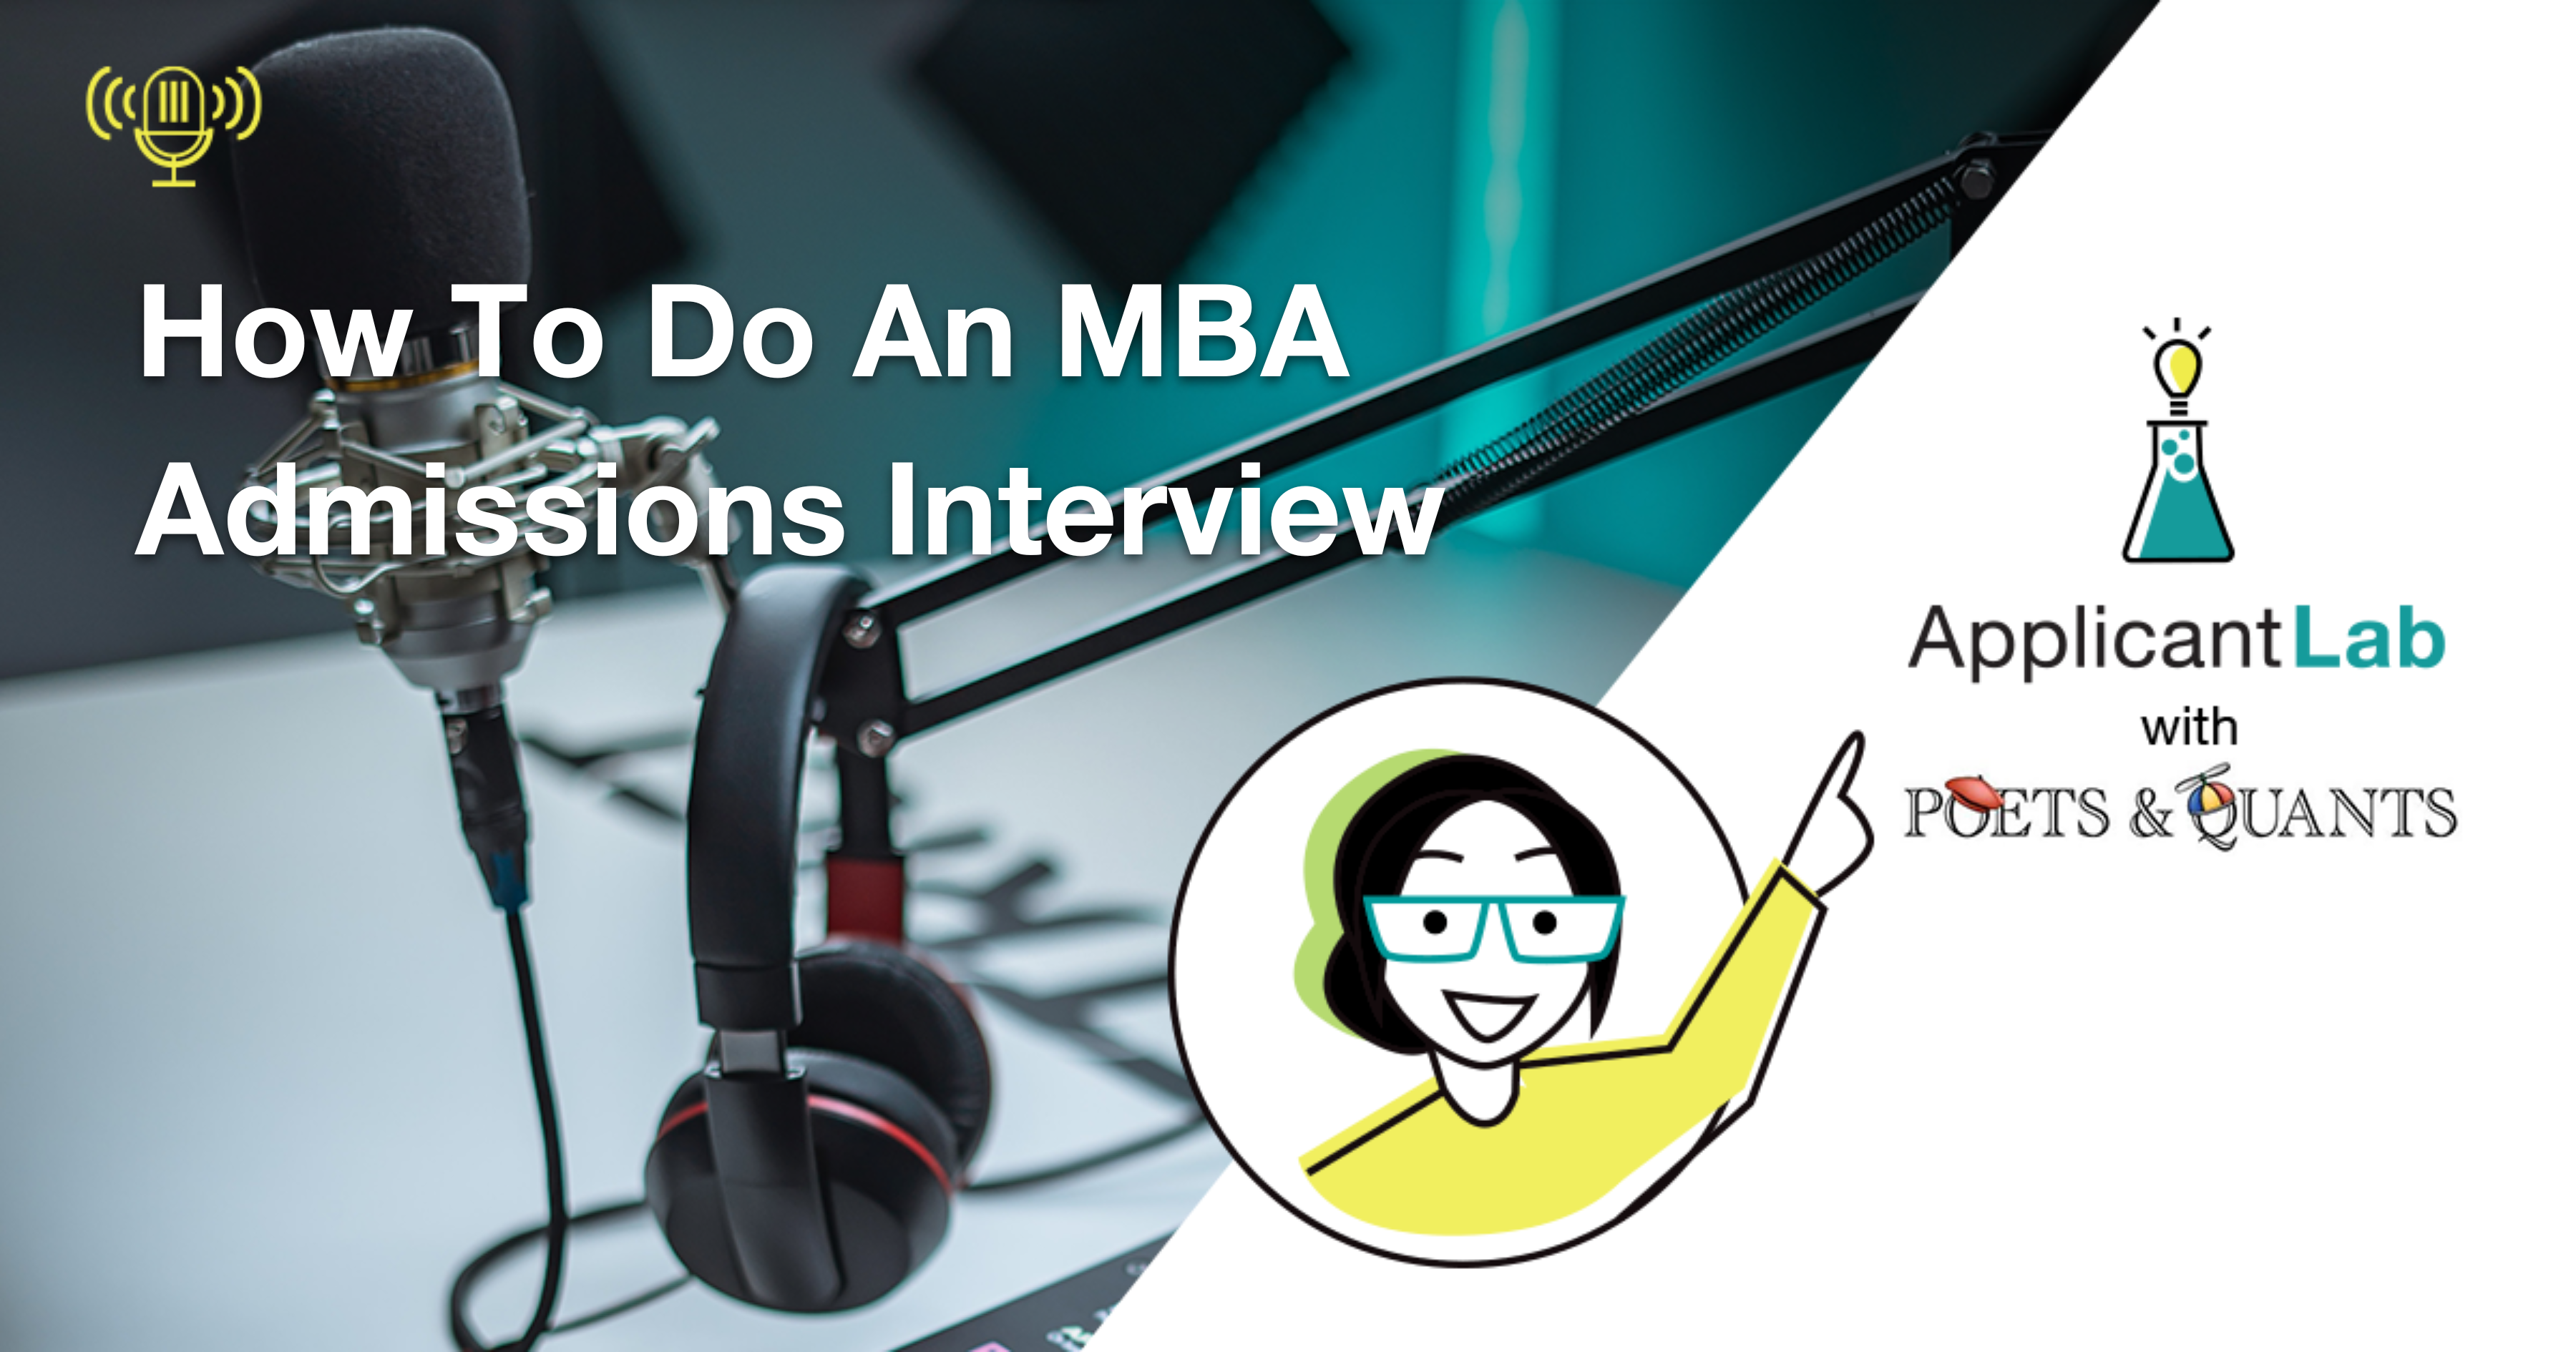 How To Do An MBA Admissions Interview